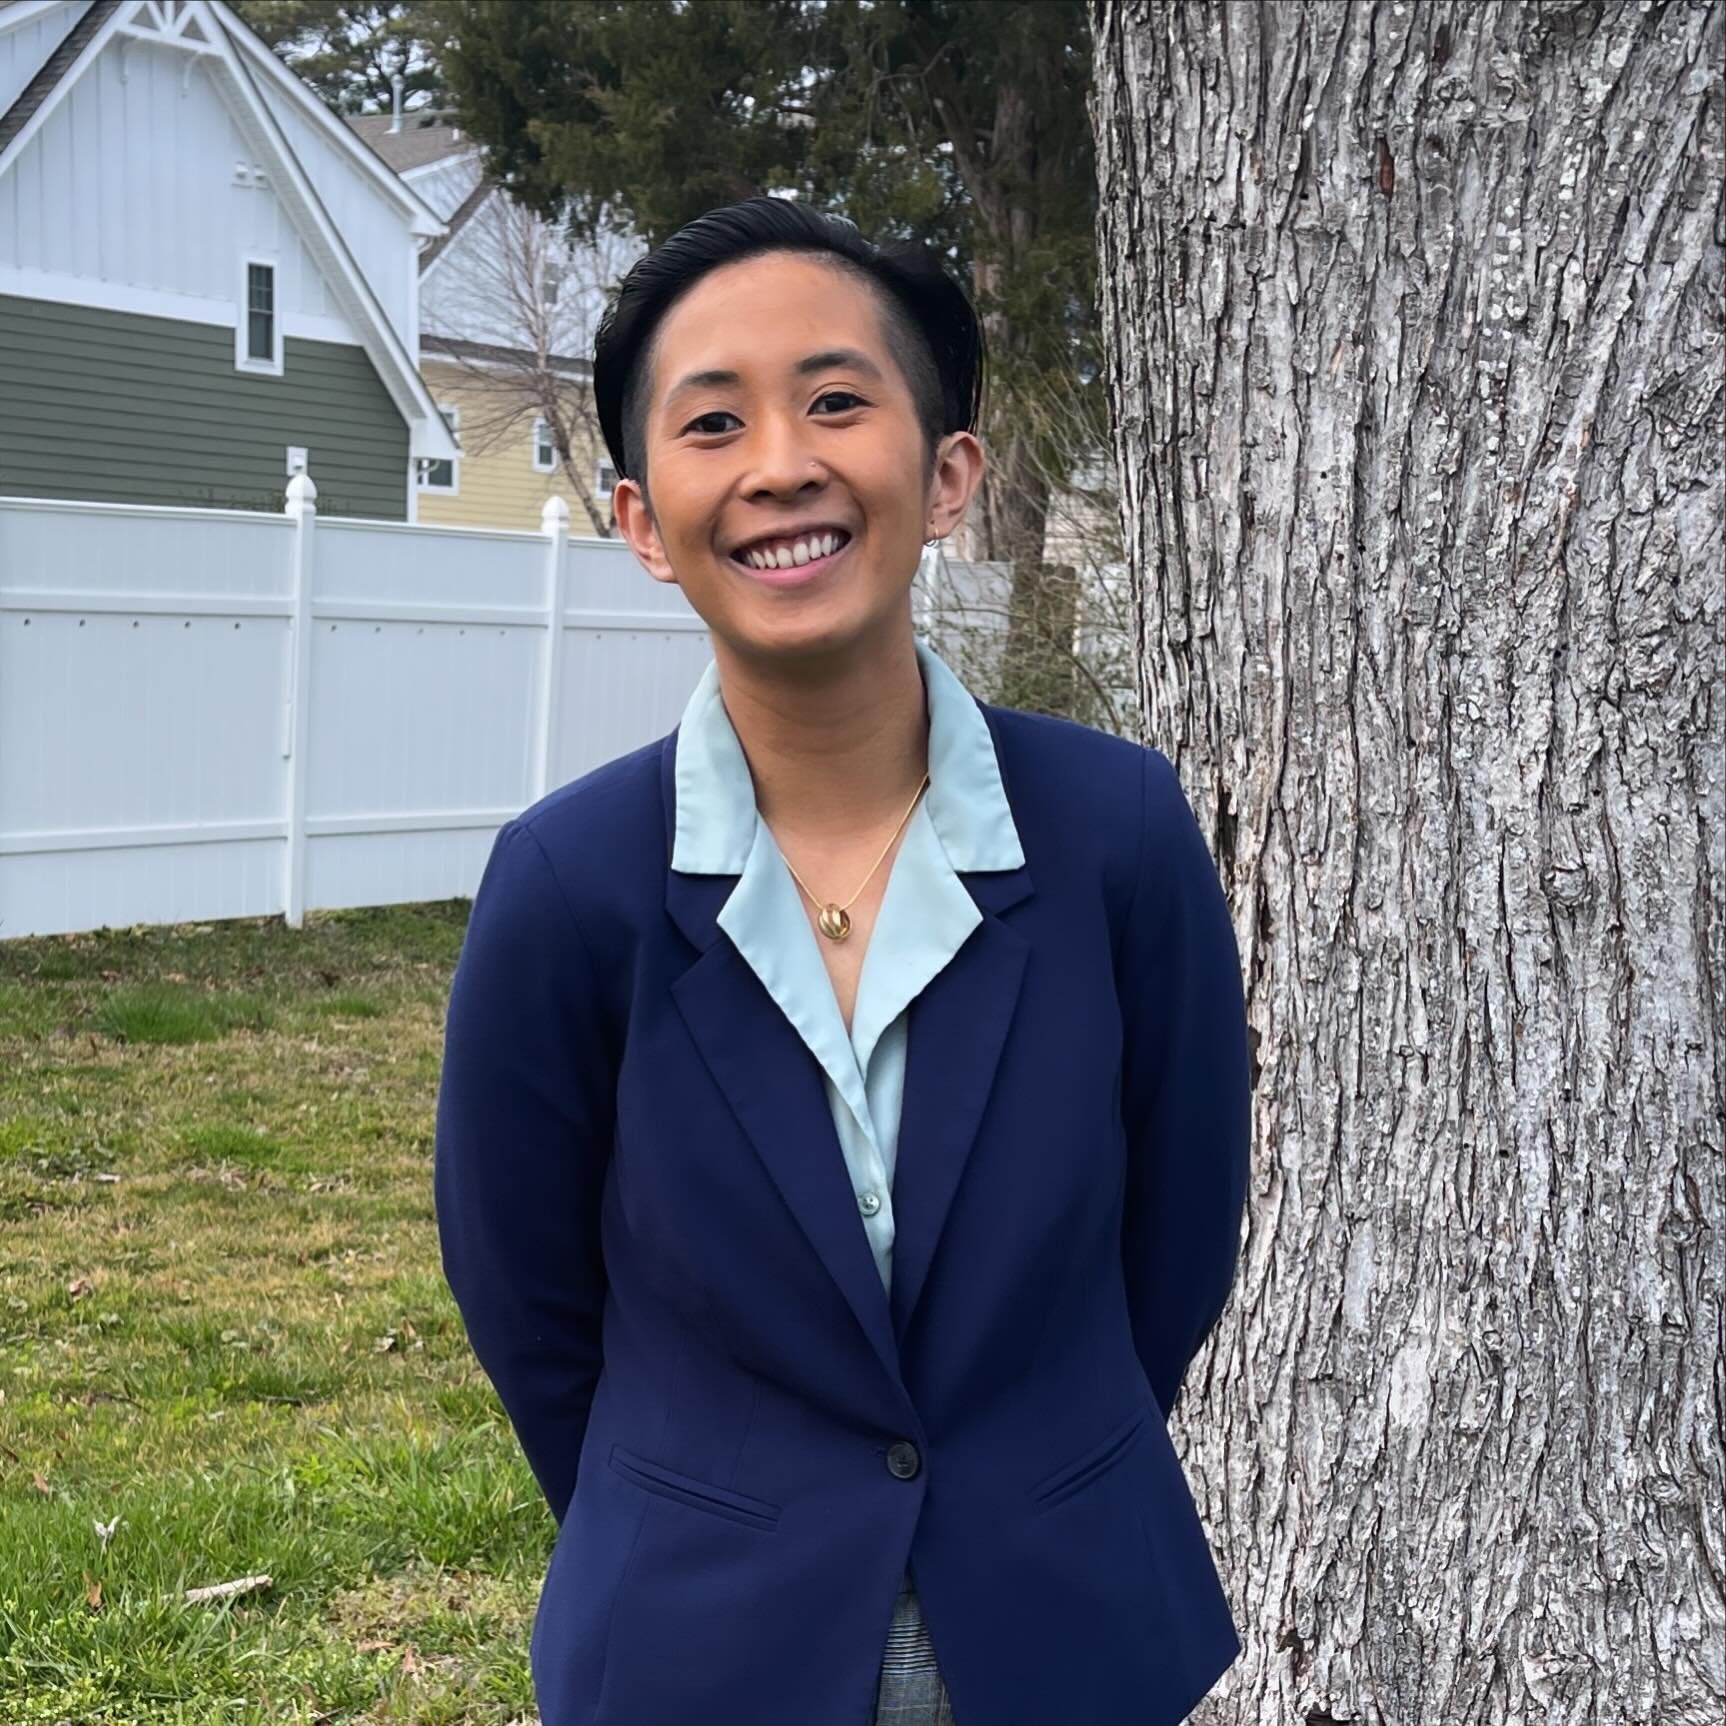 We are so excited to have Janice (@jan_fcg) join the team! Janice Guzman (they/them) is an aspiring arts manager from Chesapeake, Virginia. They believe that the performing arts should be accessible for people of all identities and backgrounds, and s